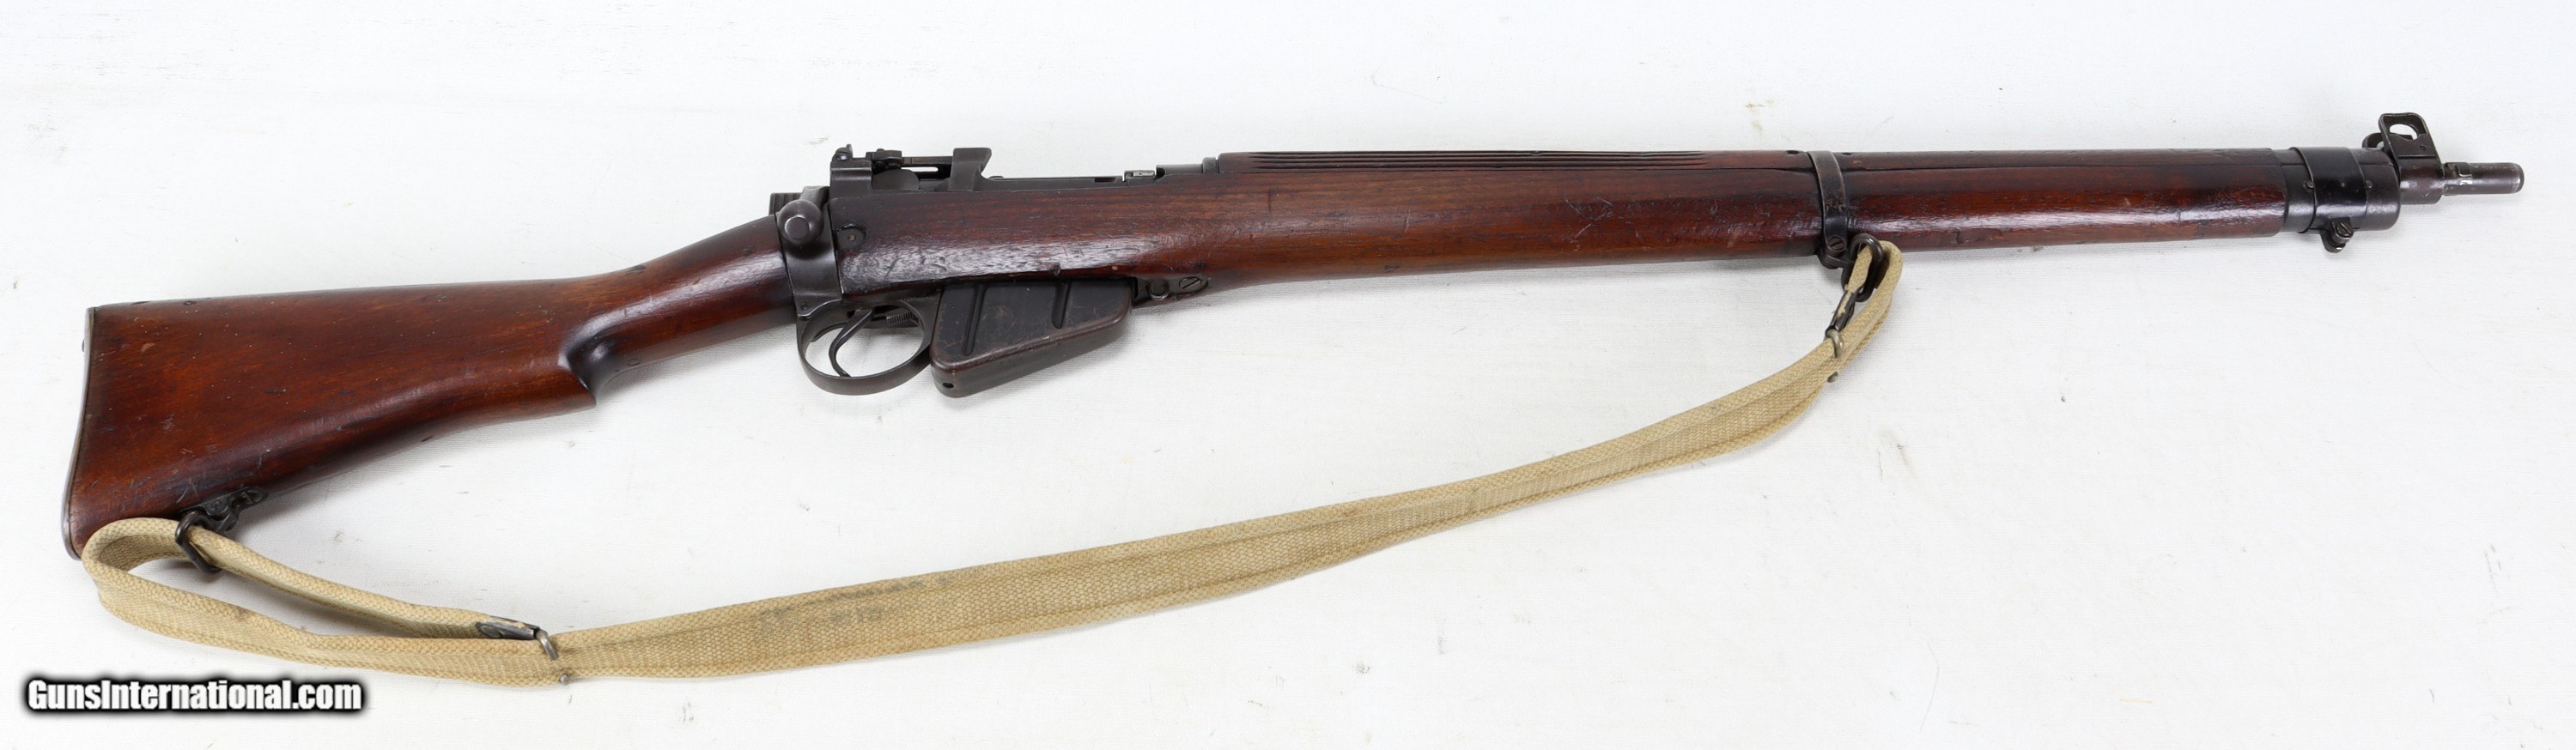 Lee-Enfield No.4 MK1 Bolt Action Rifle .303 British (1942) U.S. PROPERTY -  MADE BY SAVAGE for sale